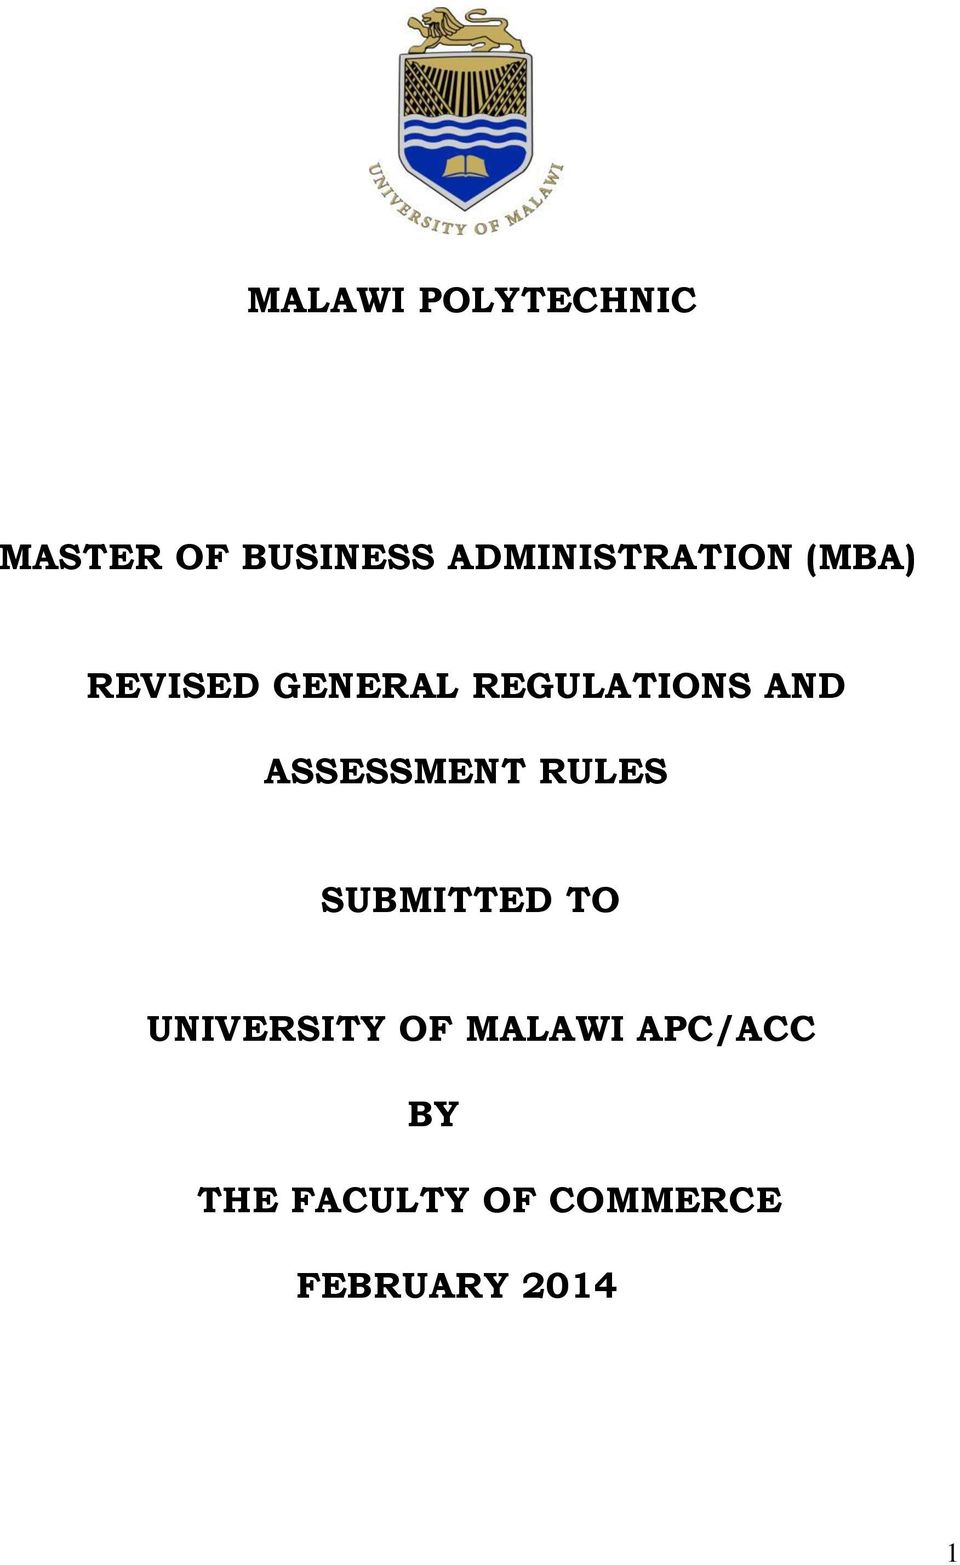 REGULATIONS AND ASSESSMENT RULES SUBMITTED TO